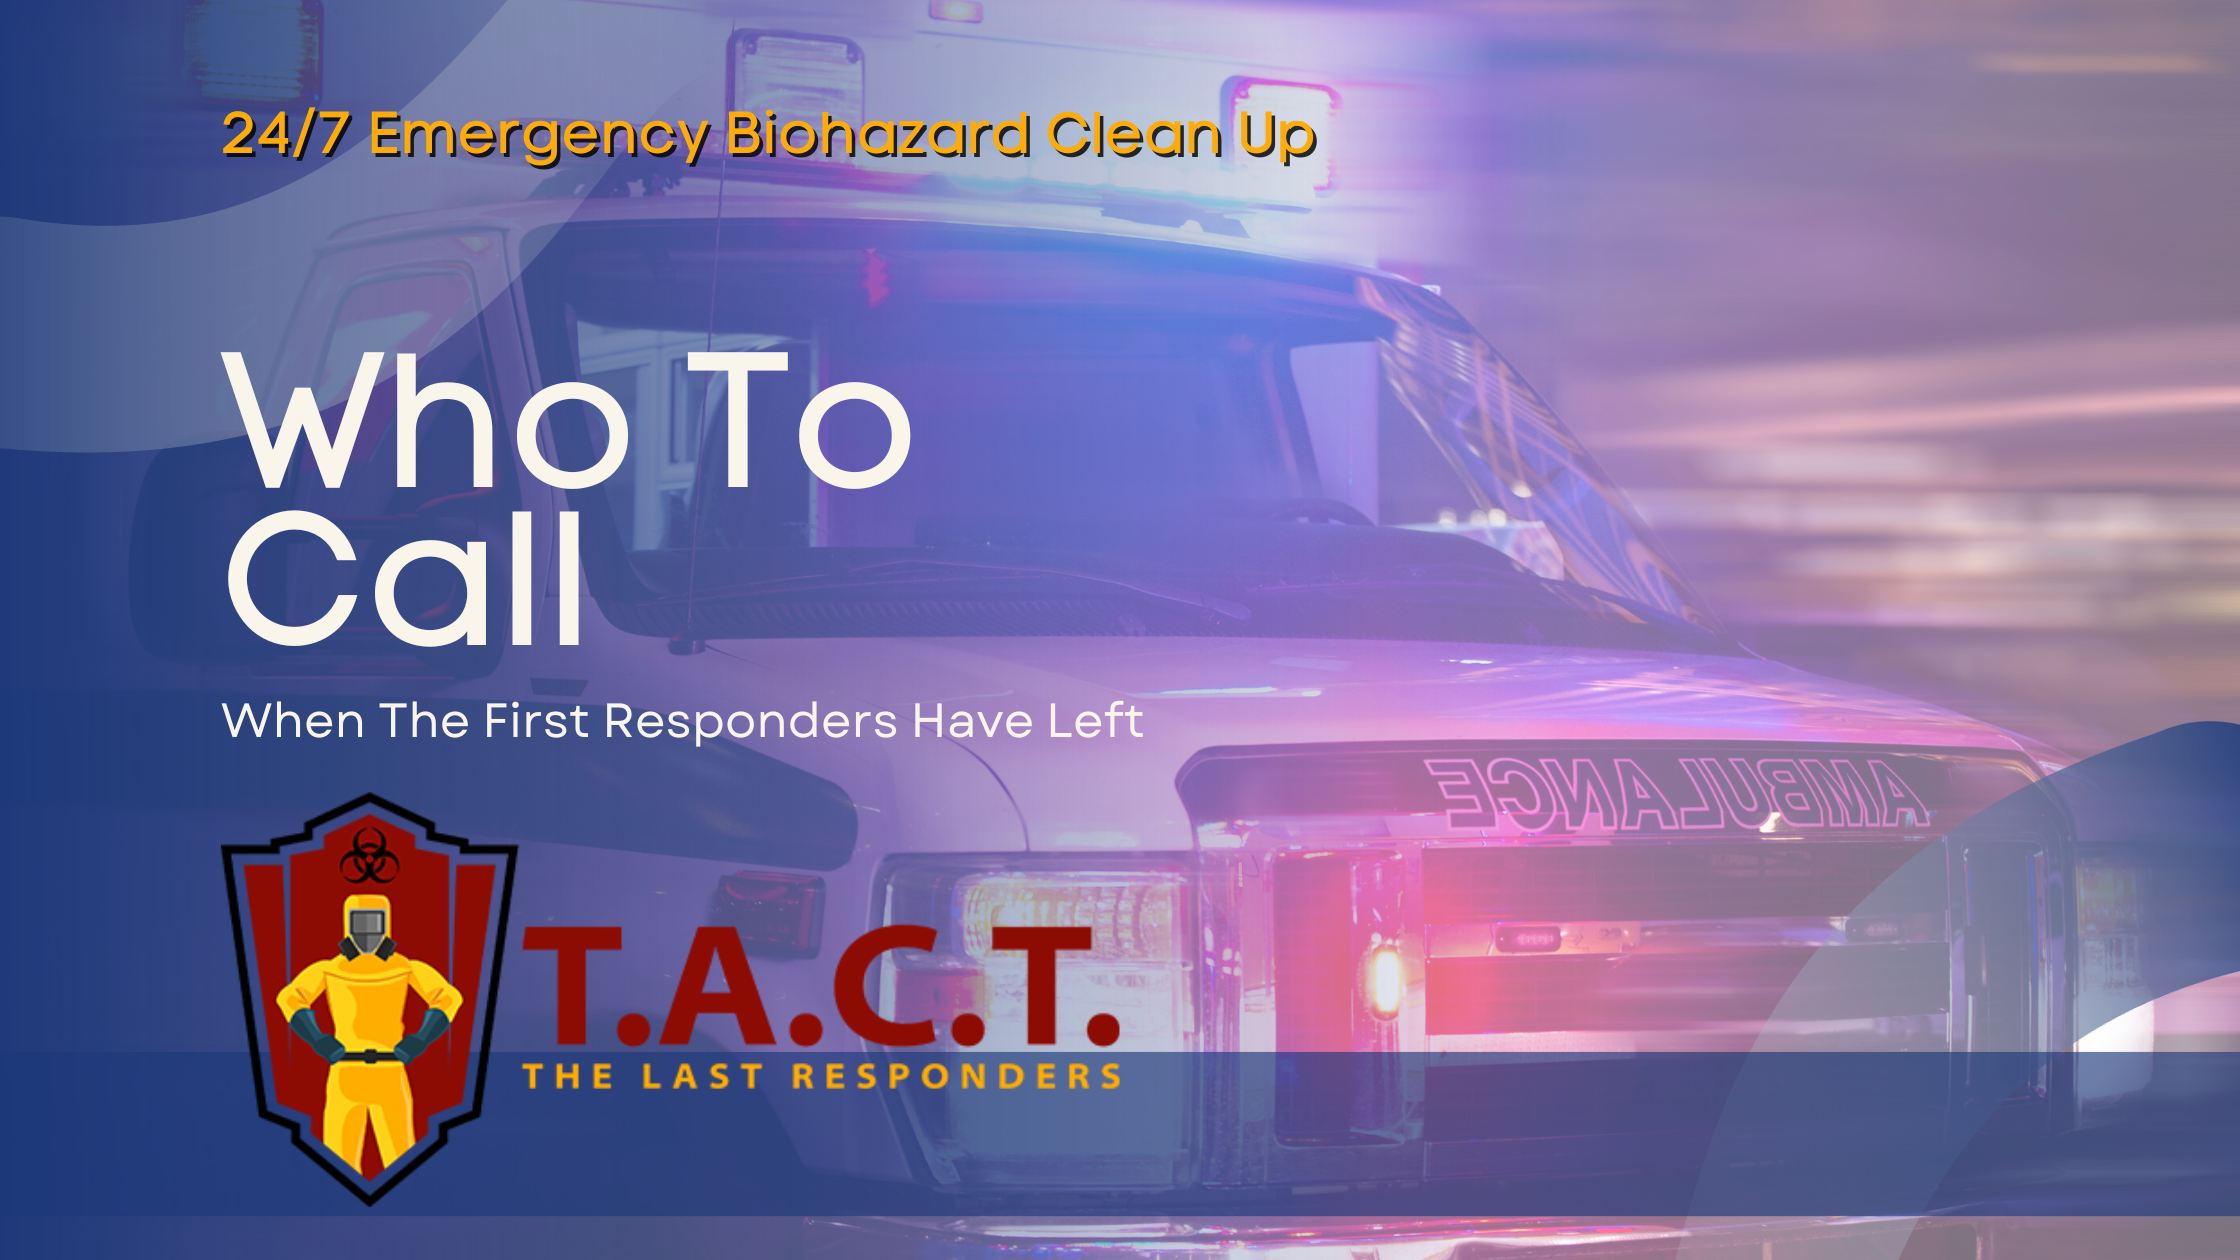 After First Responders Go: The Vital Role of Professional Biohazard Remediation